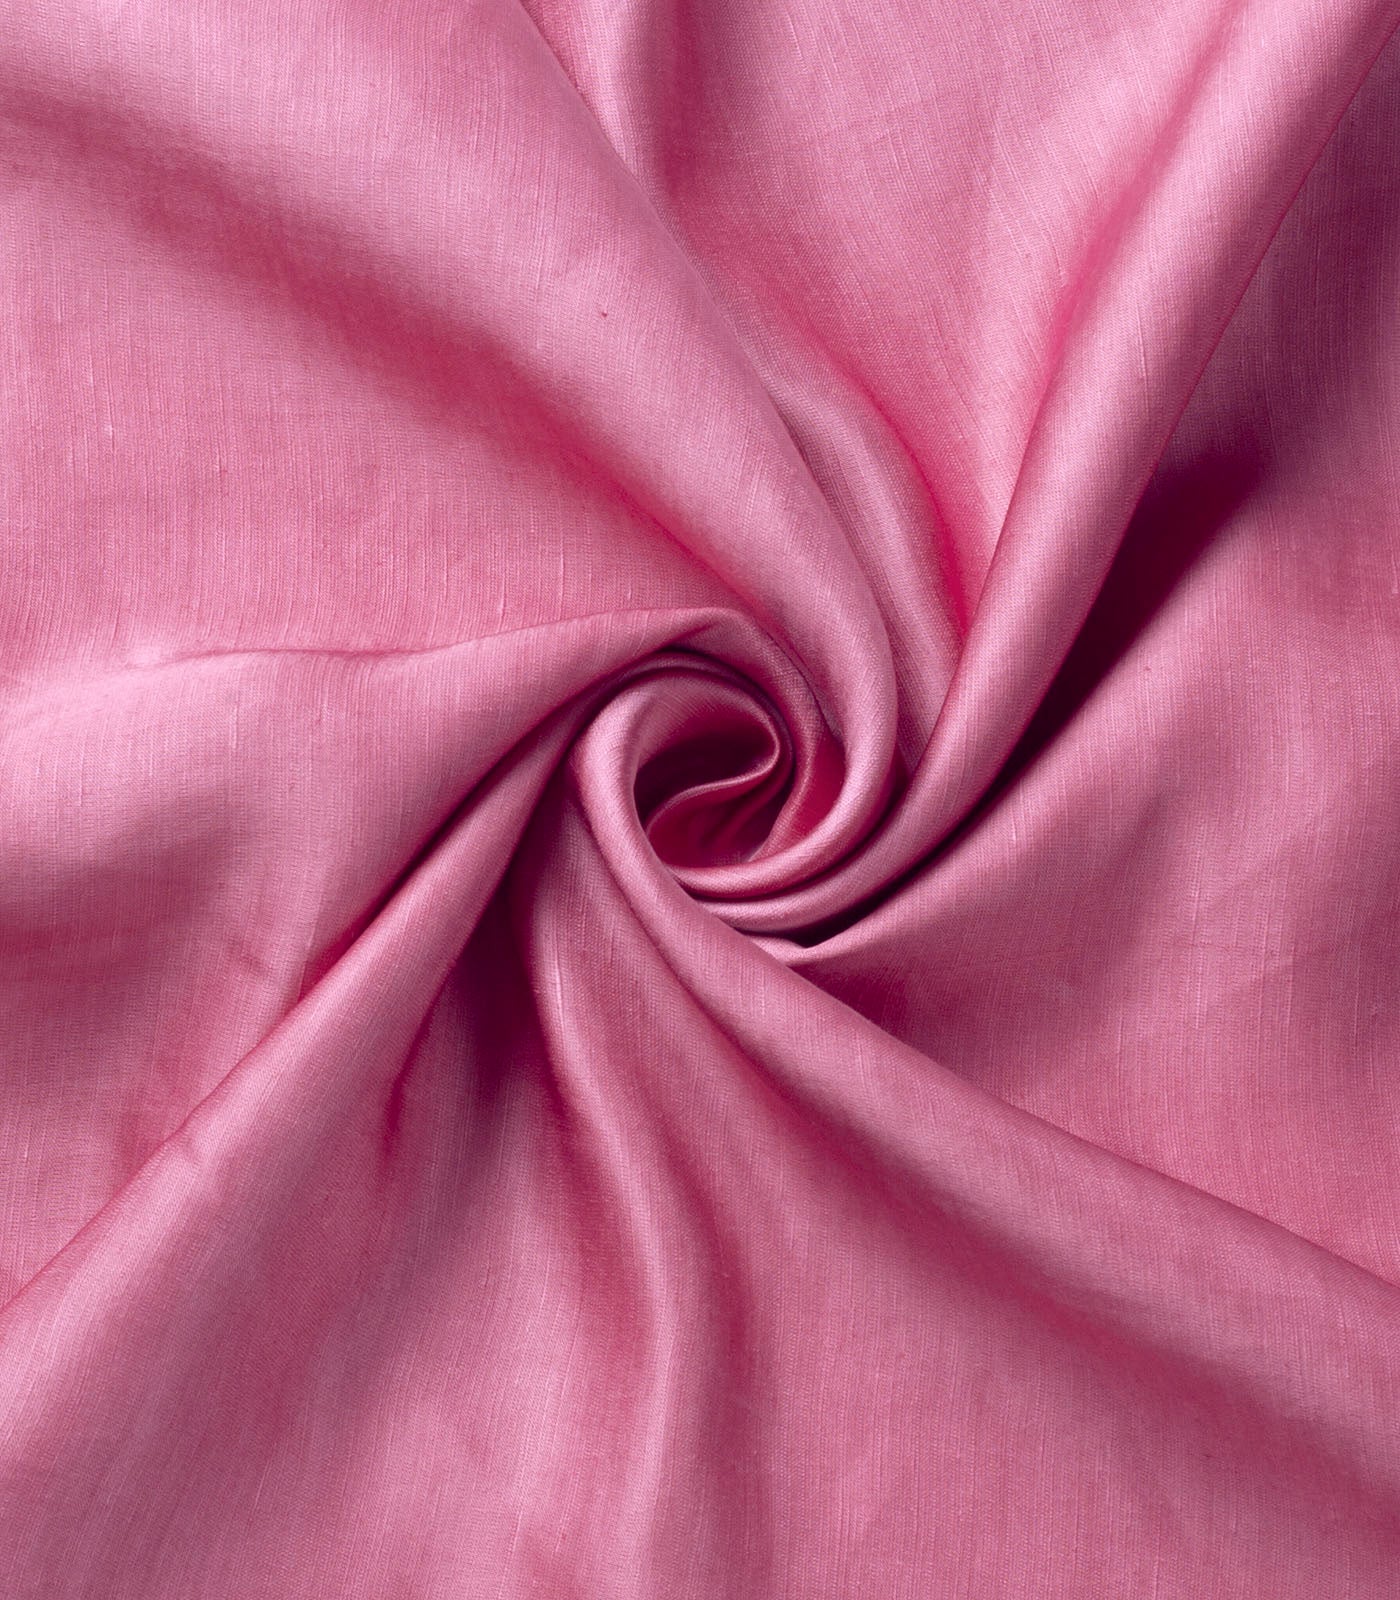 Rouge pink Linen Satin Fabric